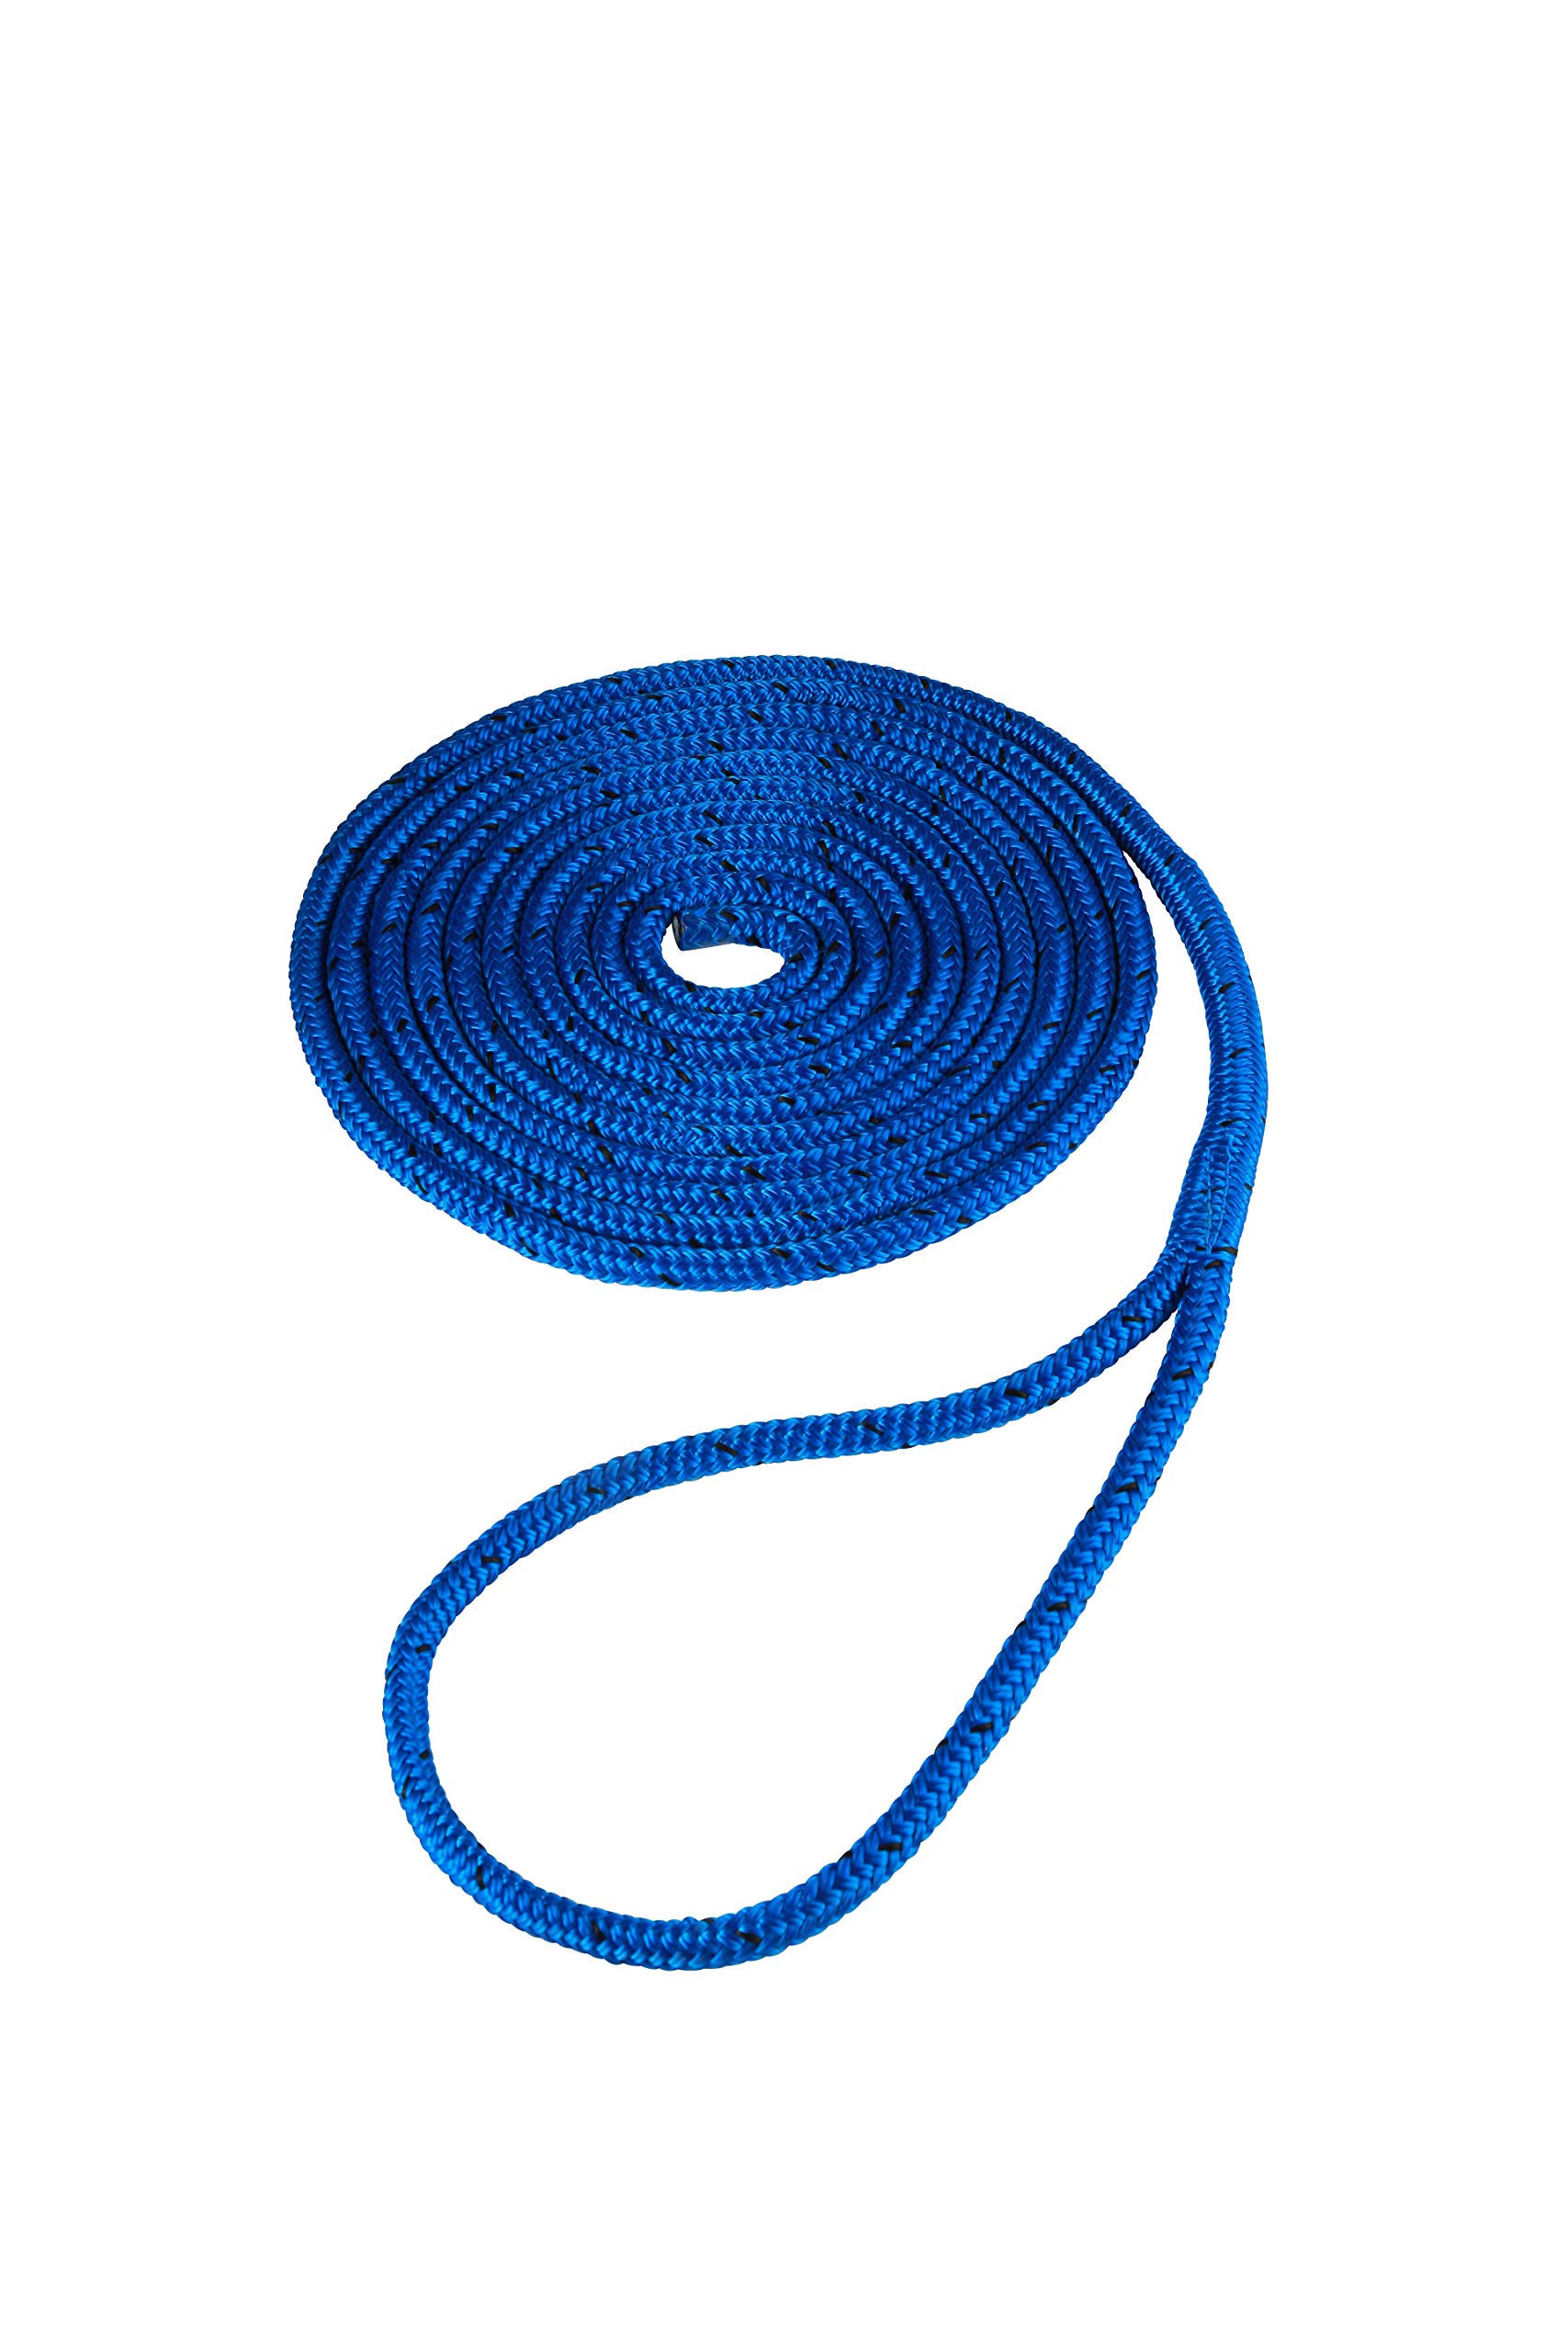 Attwood 11750-7 Solid Braided Multifilament Polypropylene (MFP) Dock Line, 3/8-Inch, 15 Feet Long, Bare Ends, Blue